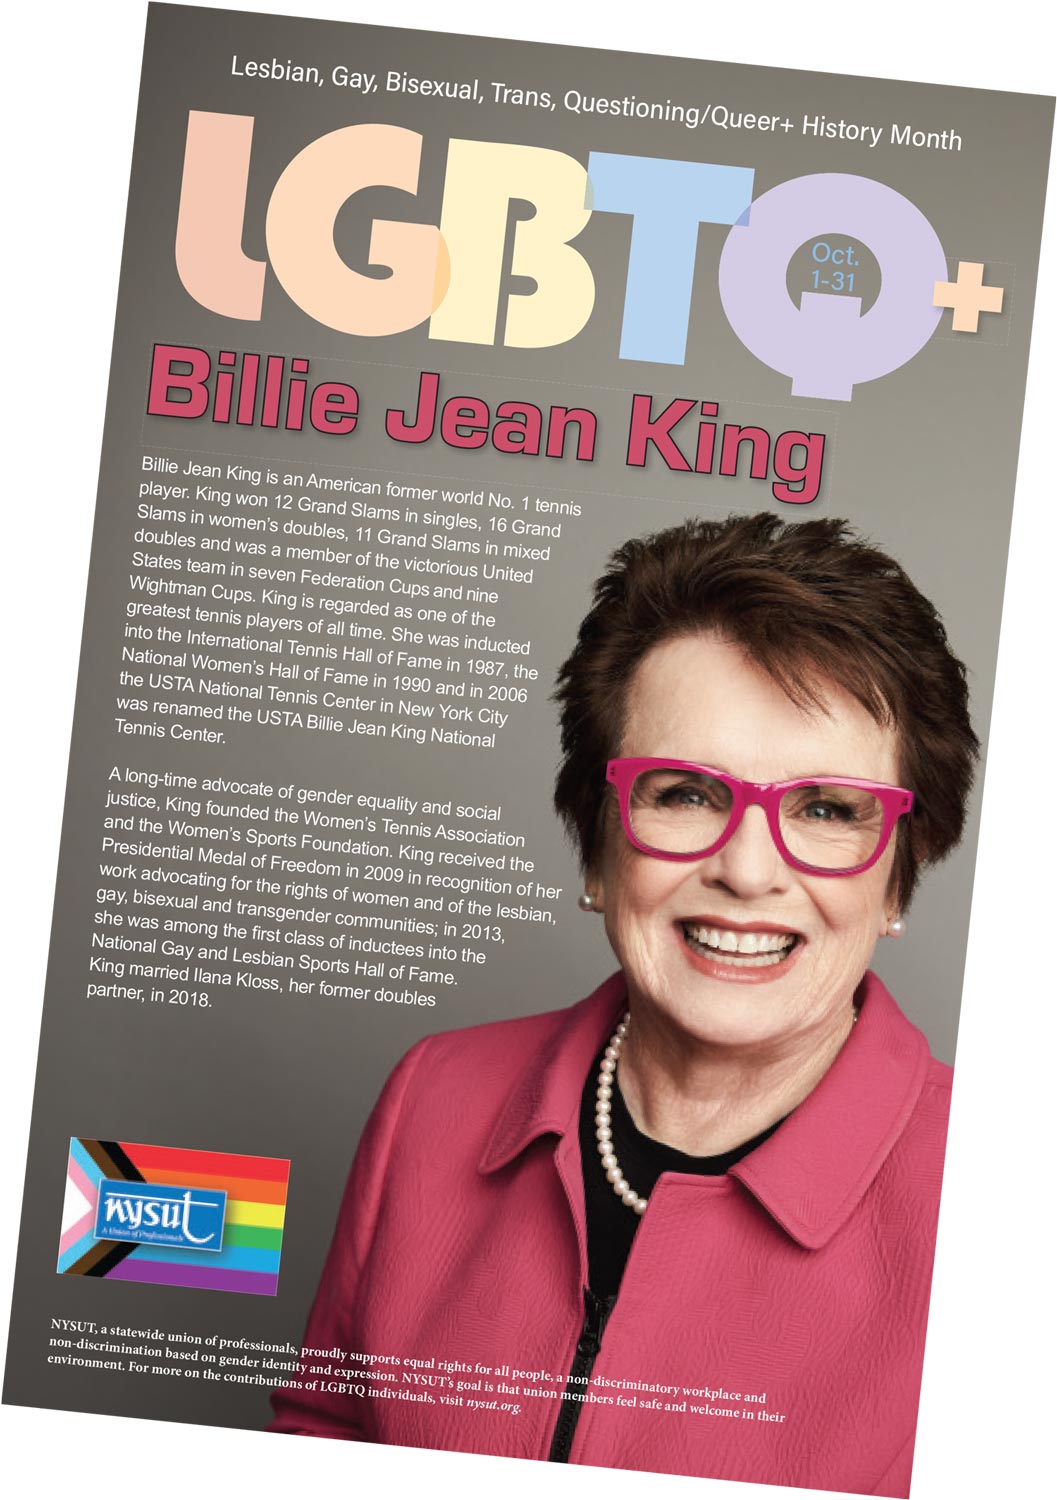 tennis player Billy Jean King on an NYSUT poster celebrating Lesbian, Gay, Bisexual, Trans, Questioning/Queer+ History Month